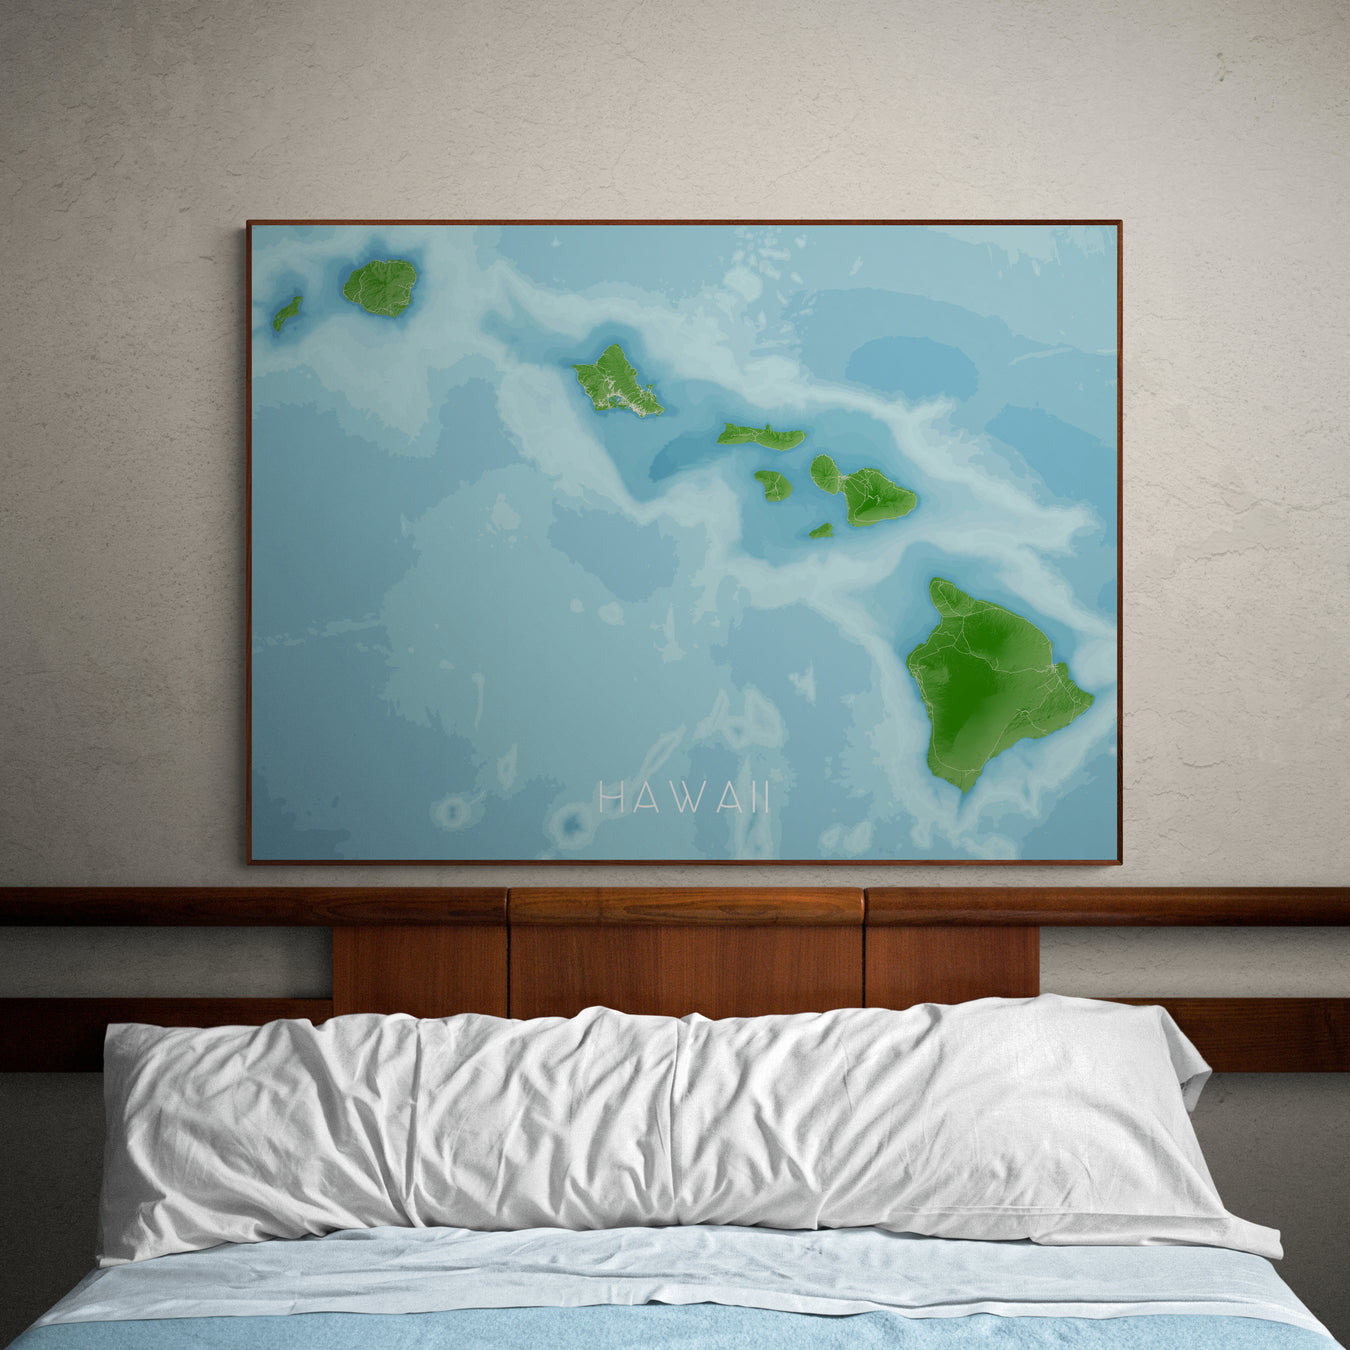 Hawaiian Islands map prints and posters by Maps As Art.